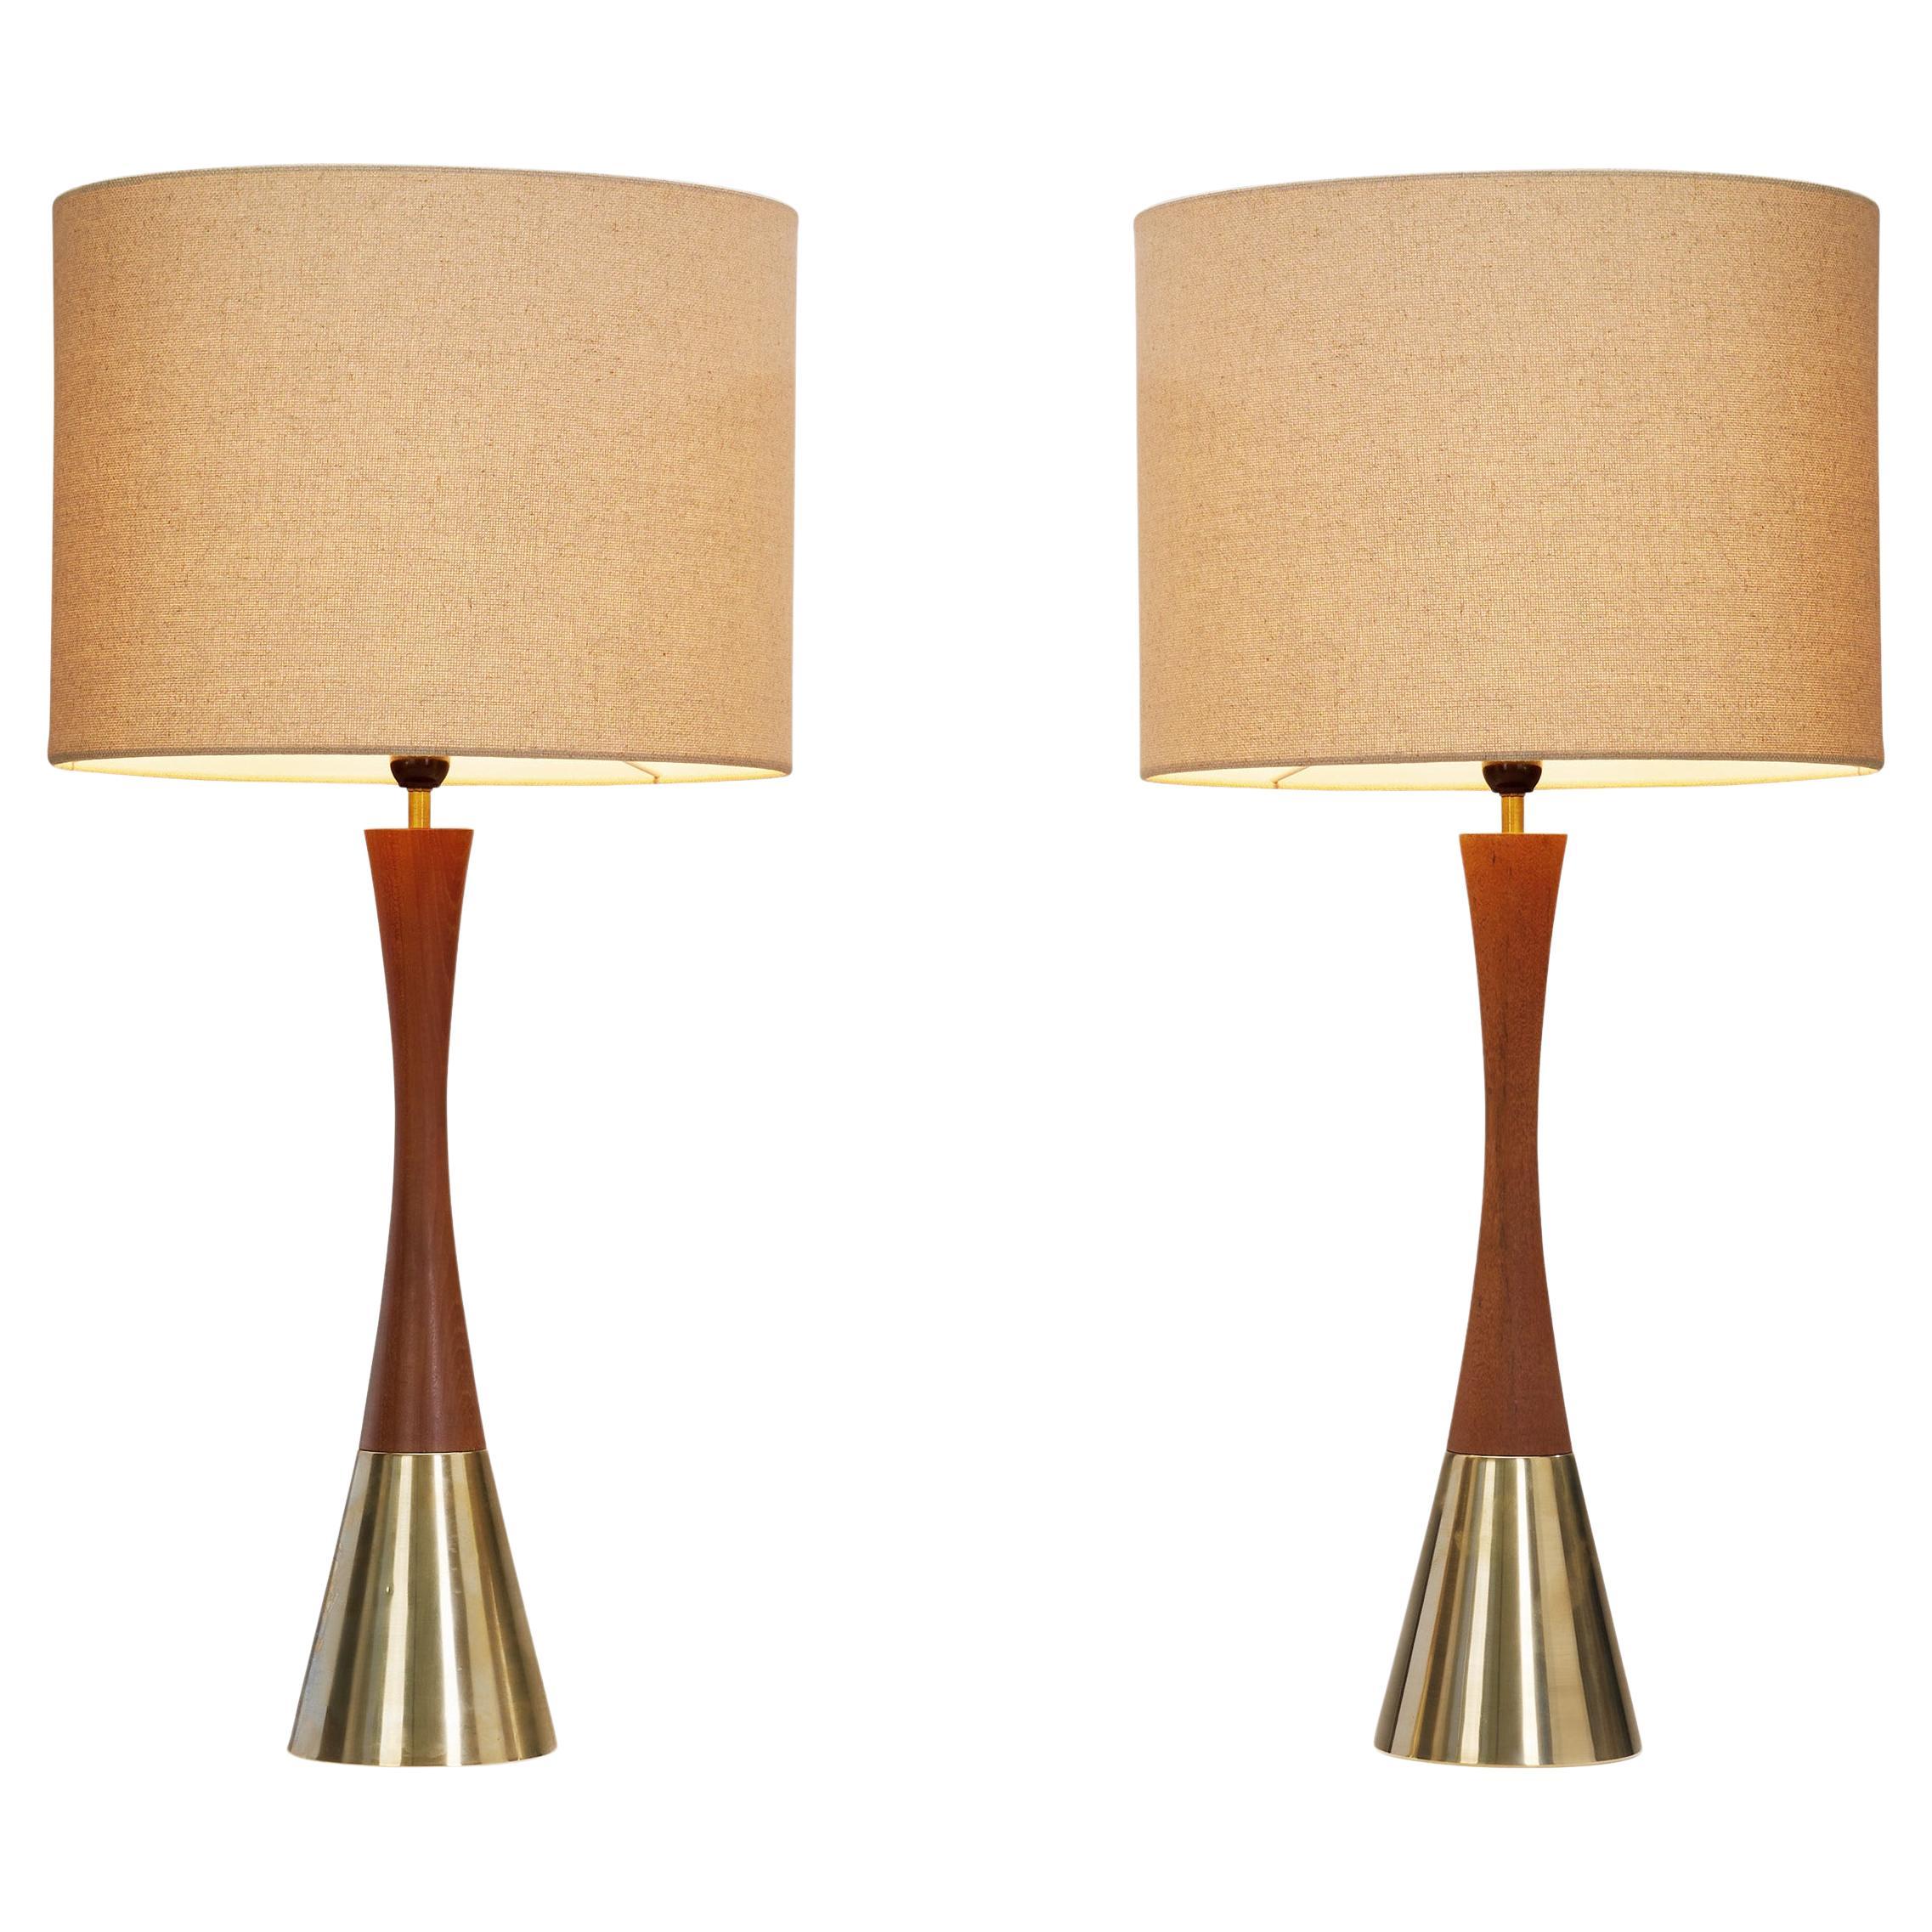 Pair of Teak and Brass Table Lamps by Bergboms, Sweden ca 1970s For Sale